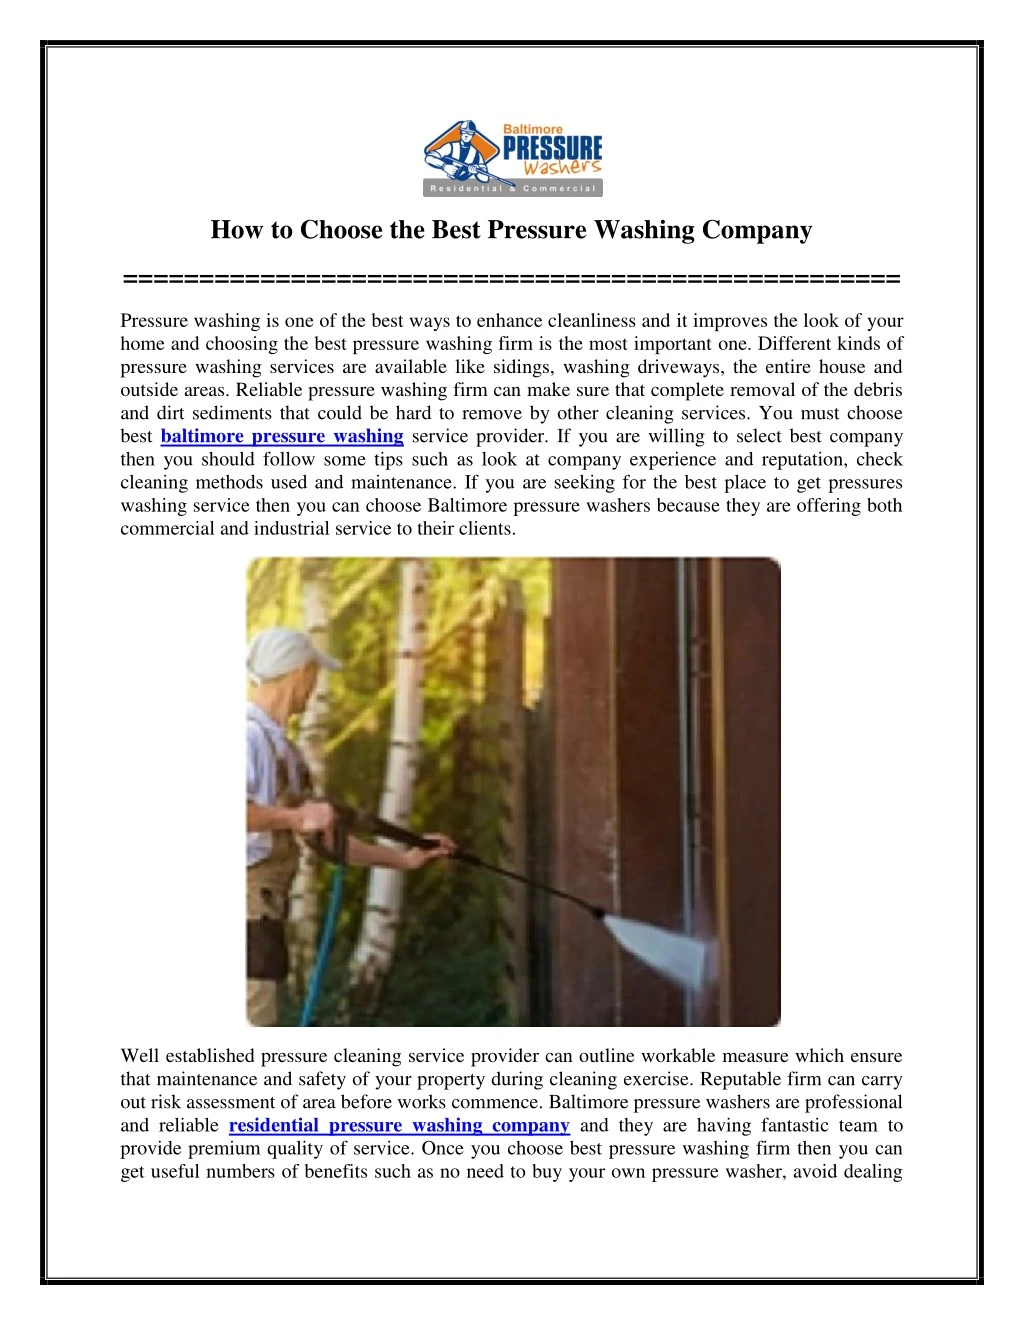 how to choose the best pressure washing company